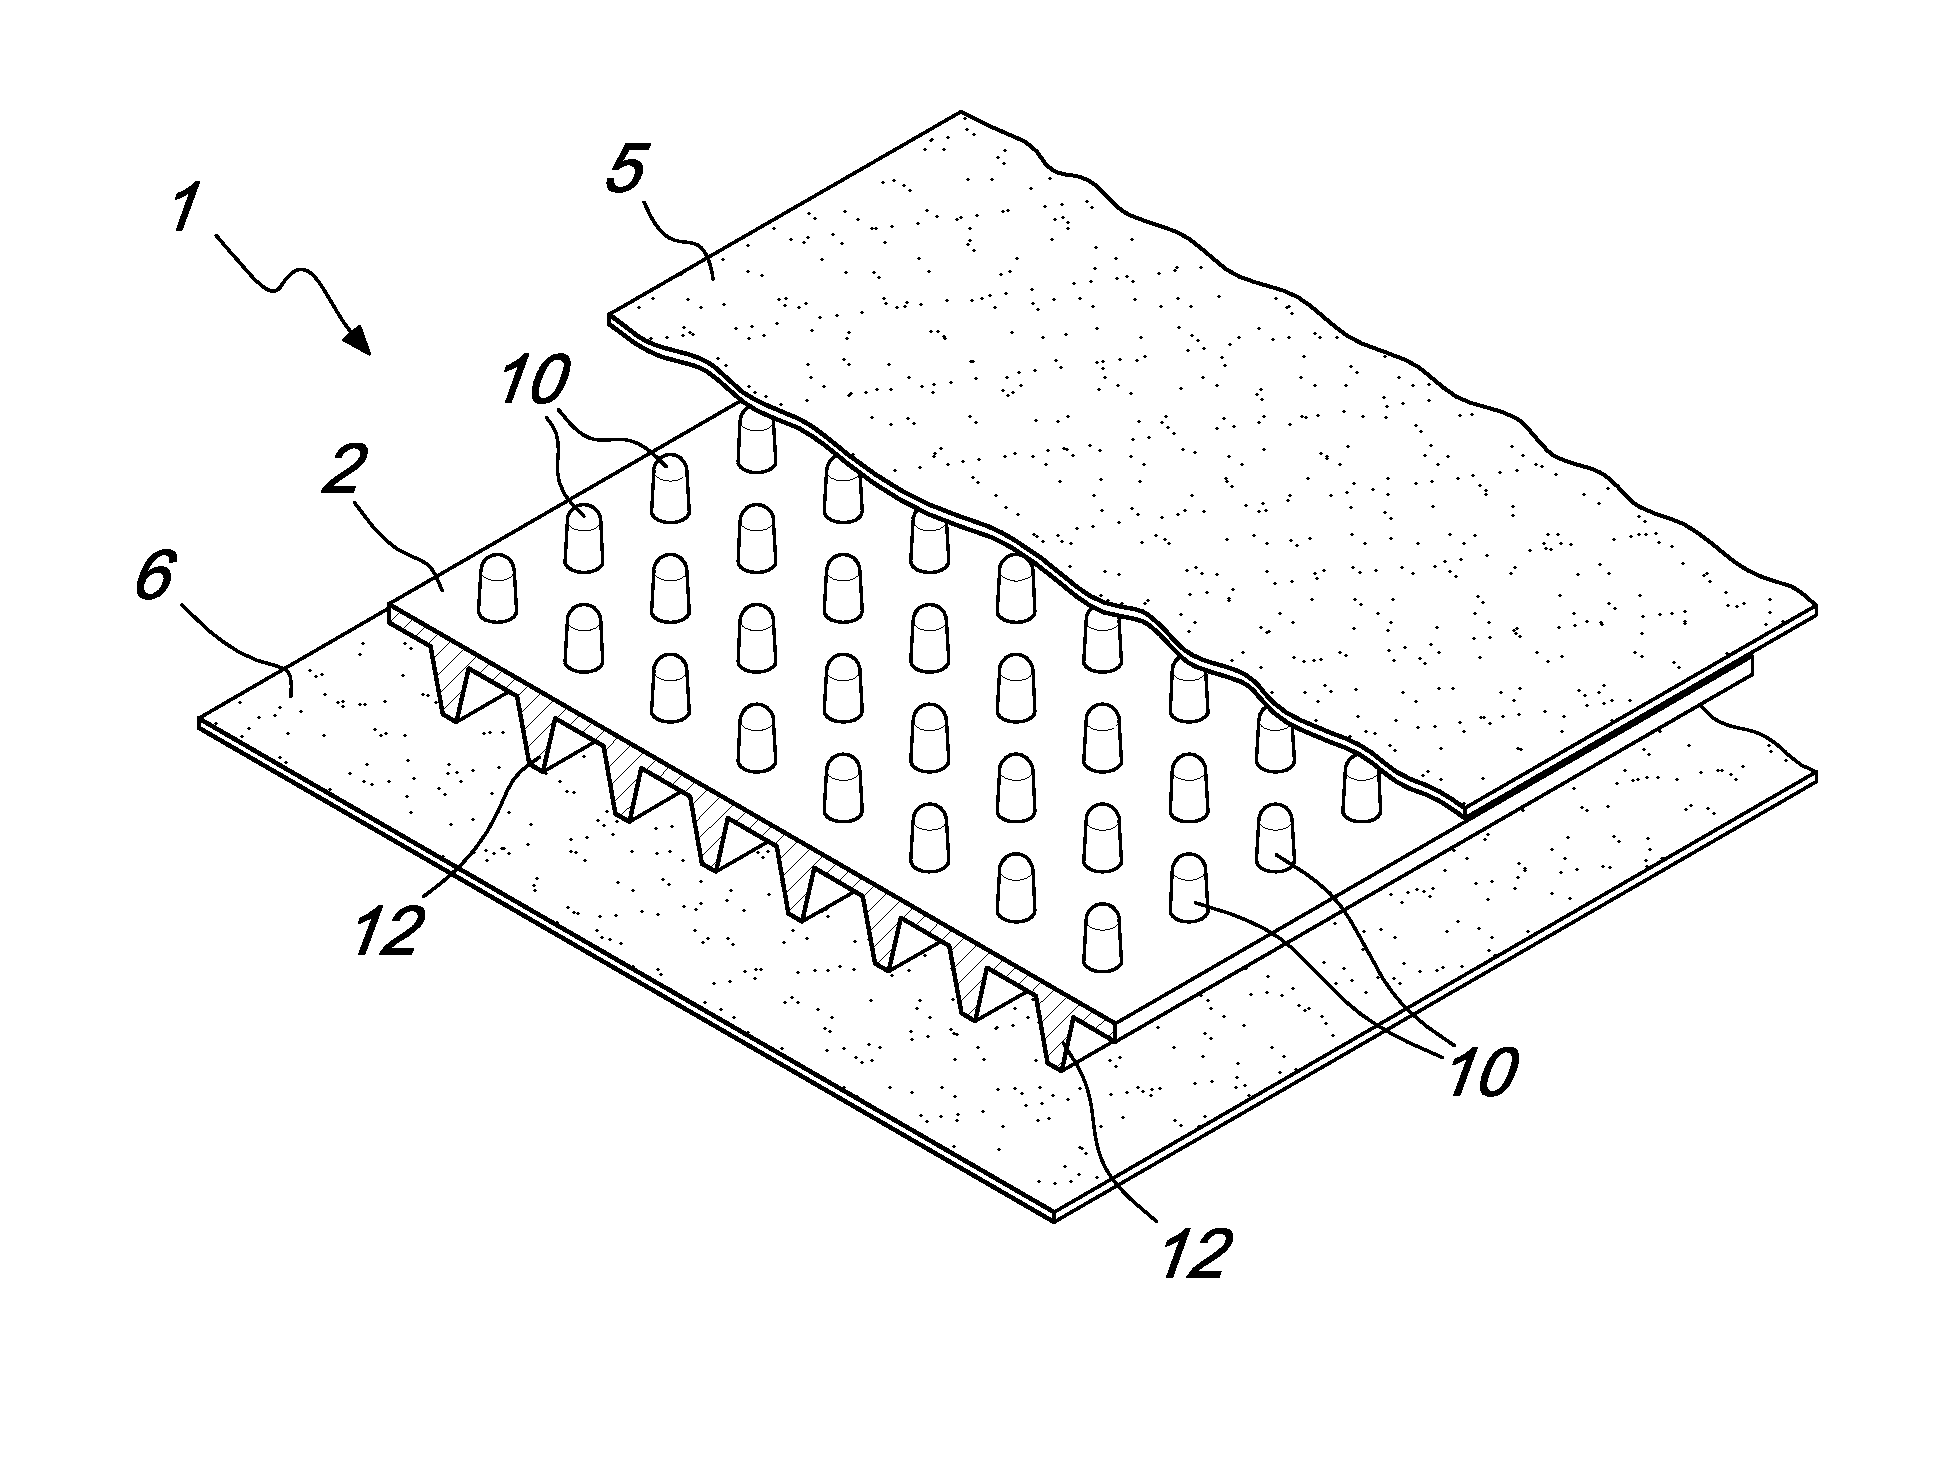 Composite for geotechnics, building and the like, with impermeable layer